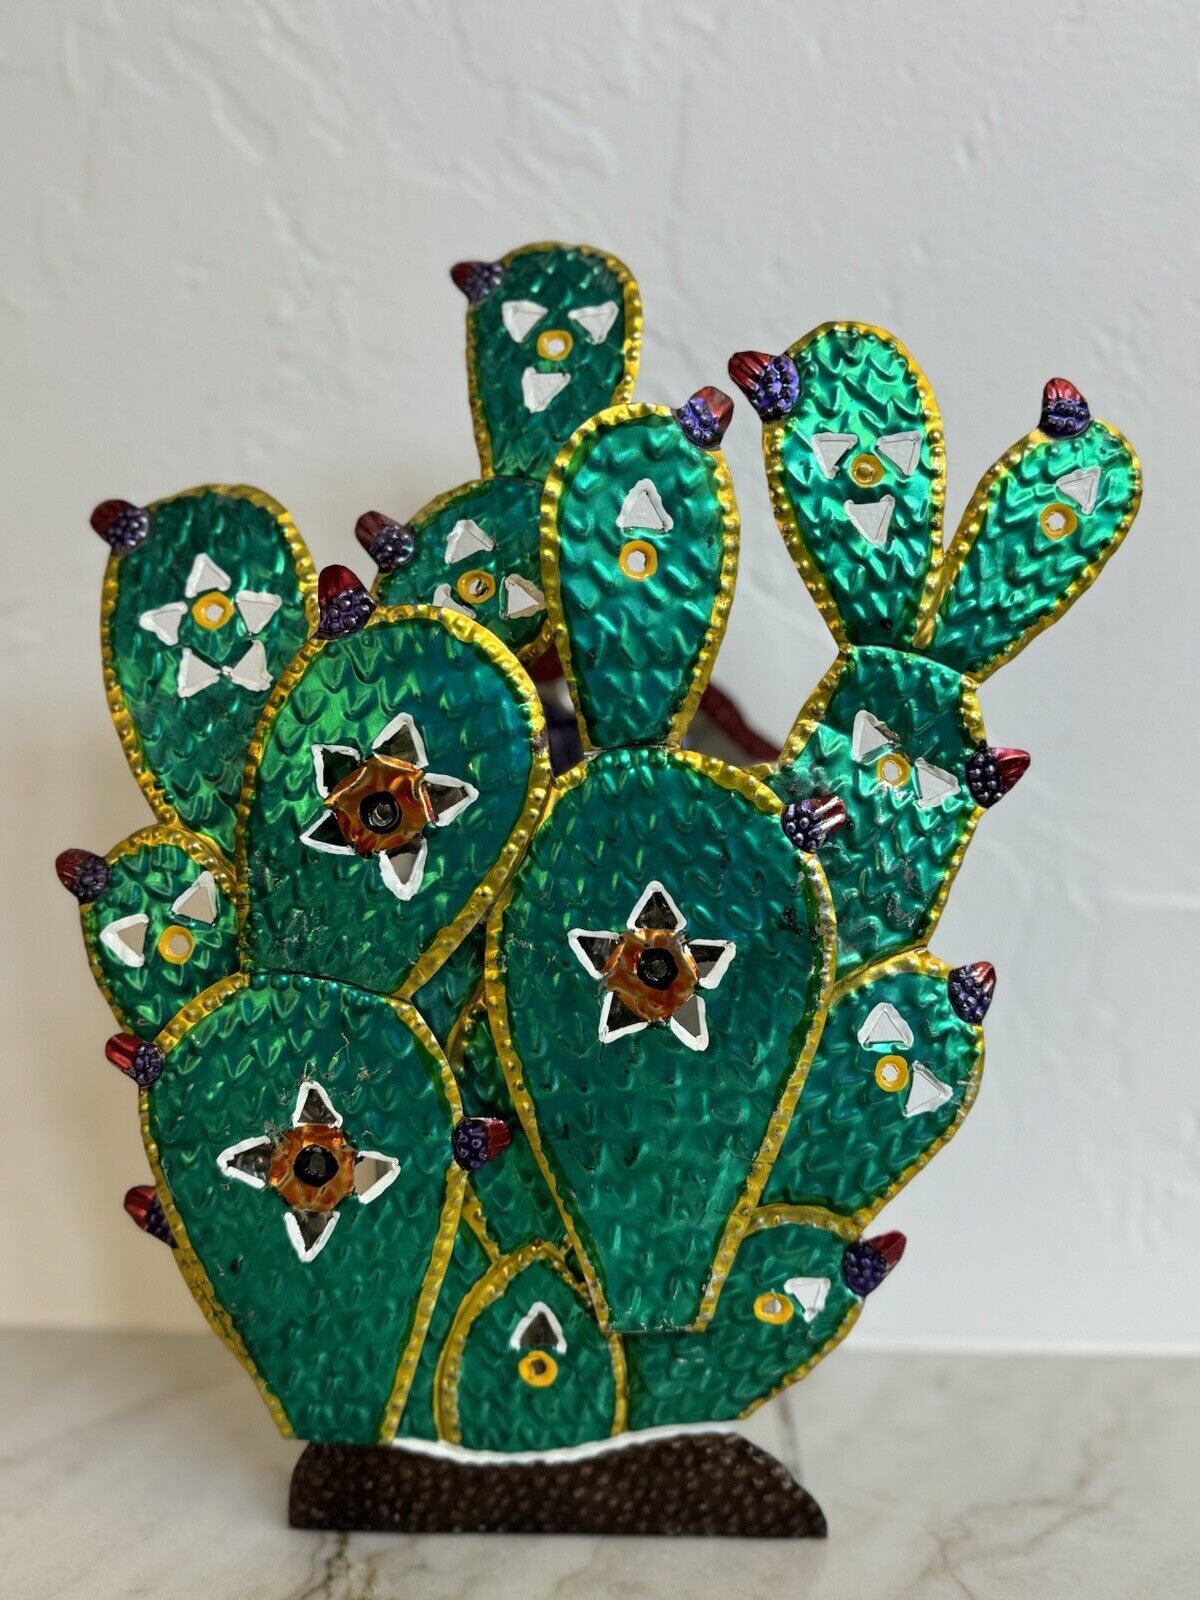 Vintage Mexican Folk Art Punched Pierced Prickly Pear Cactus Candle Holder